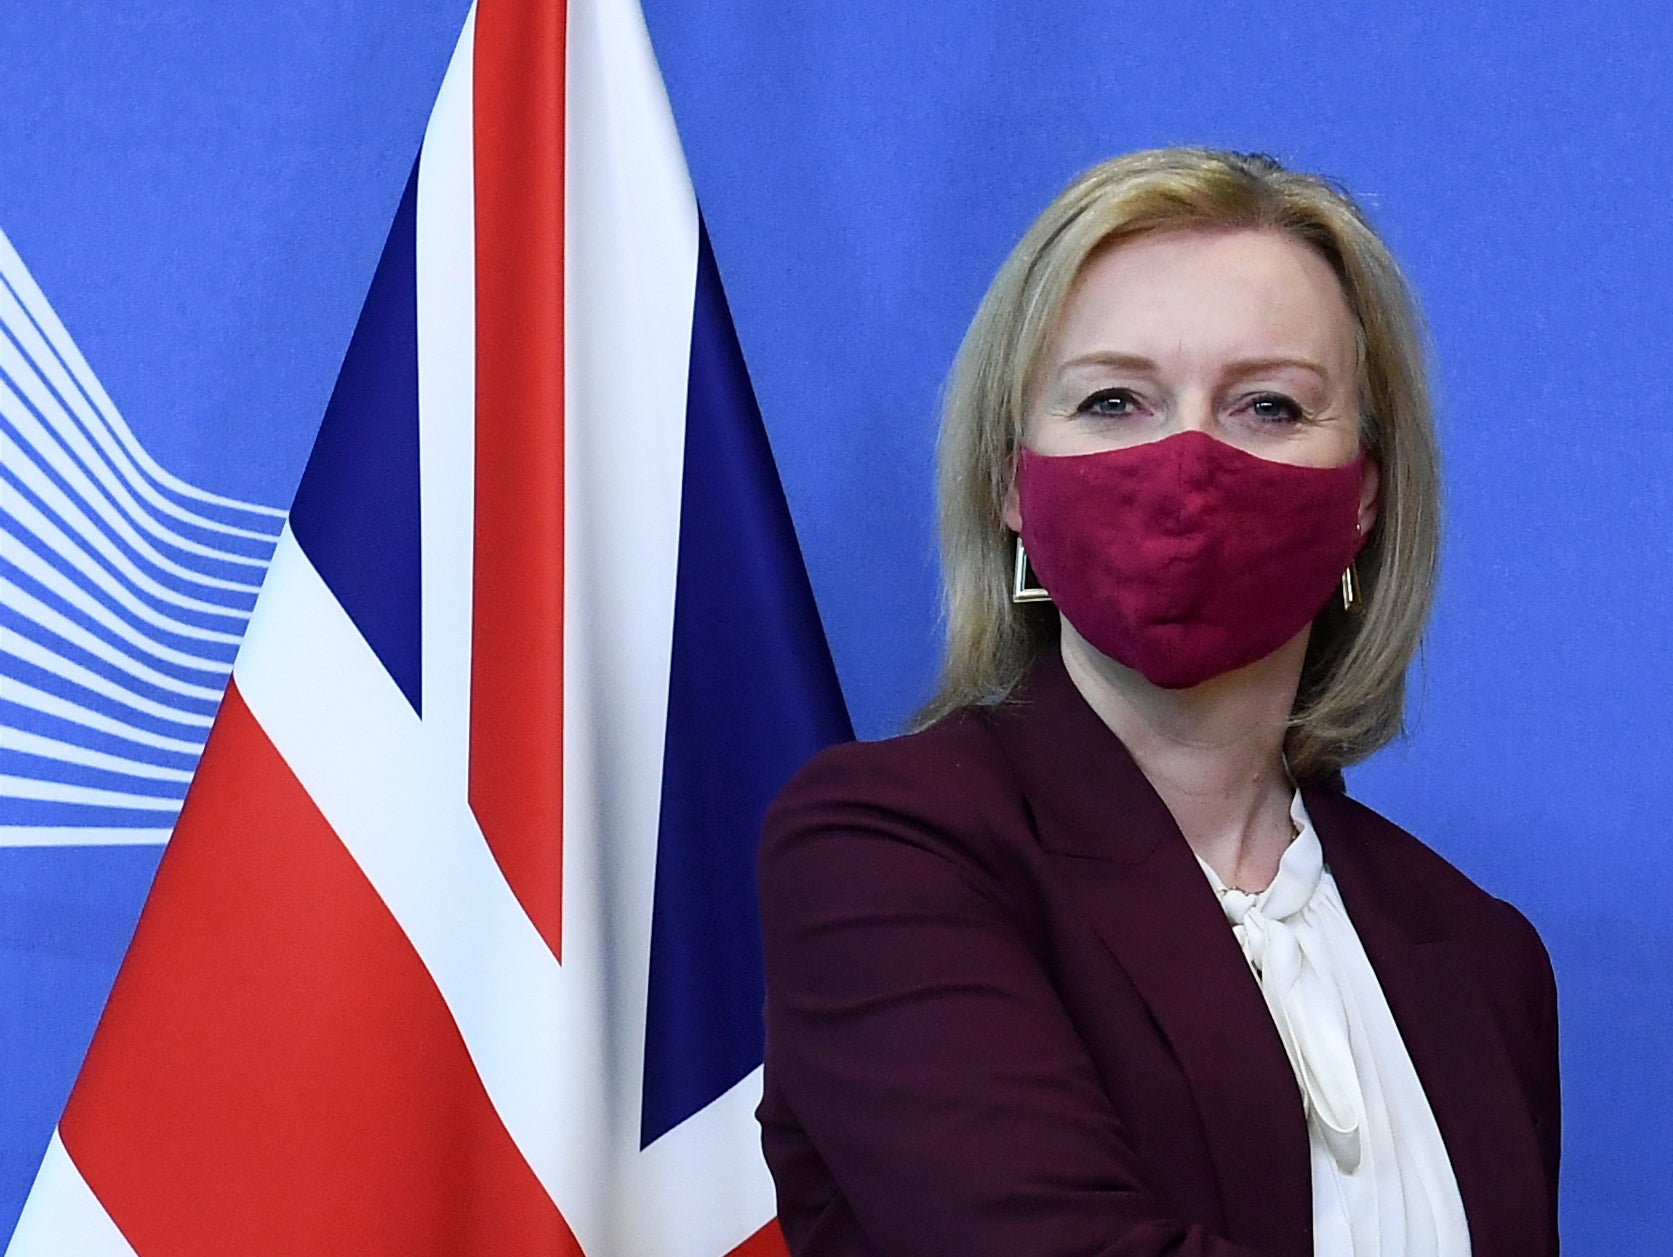 Foreign Secretary Liz Truss arrives for a meeting with European Commissioner for Inter-institutional Relations and Foresight Maros Sefcovic at EU headquarters in Brussels